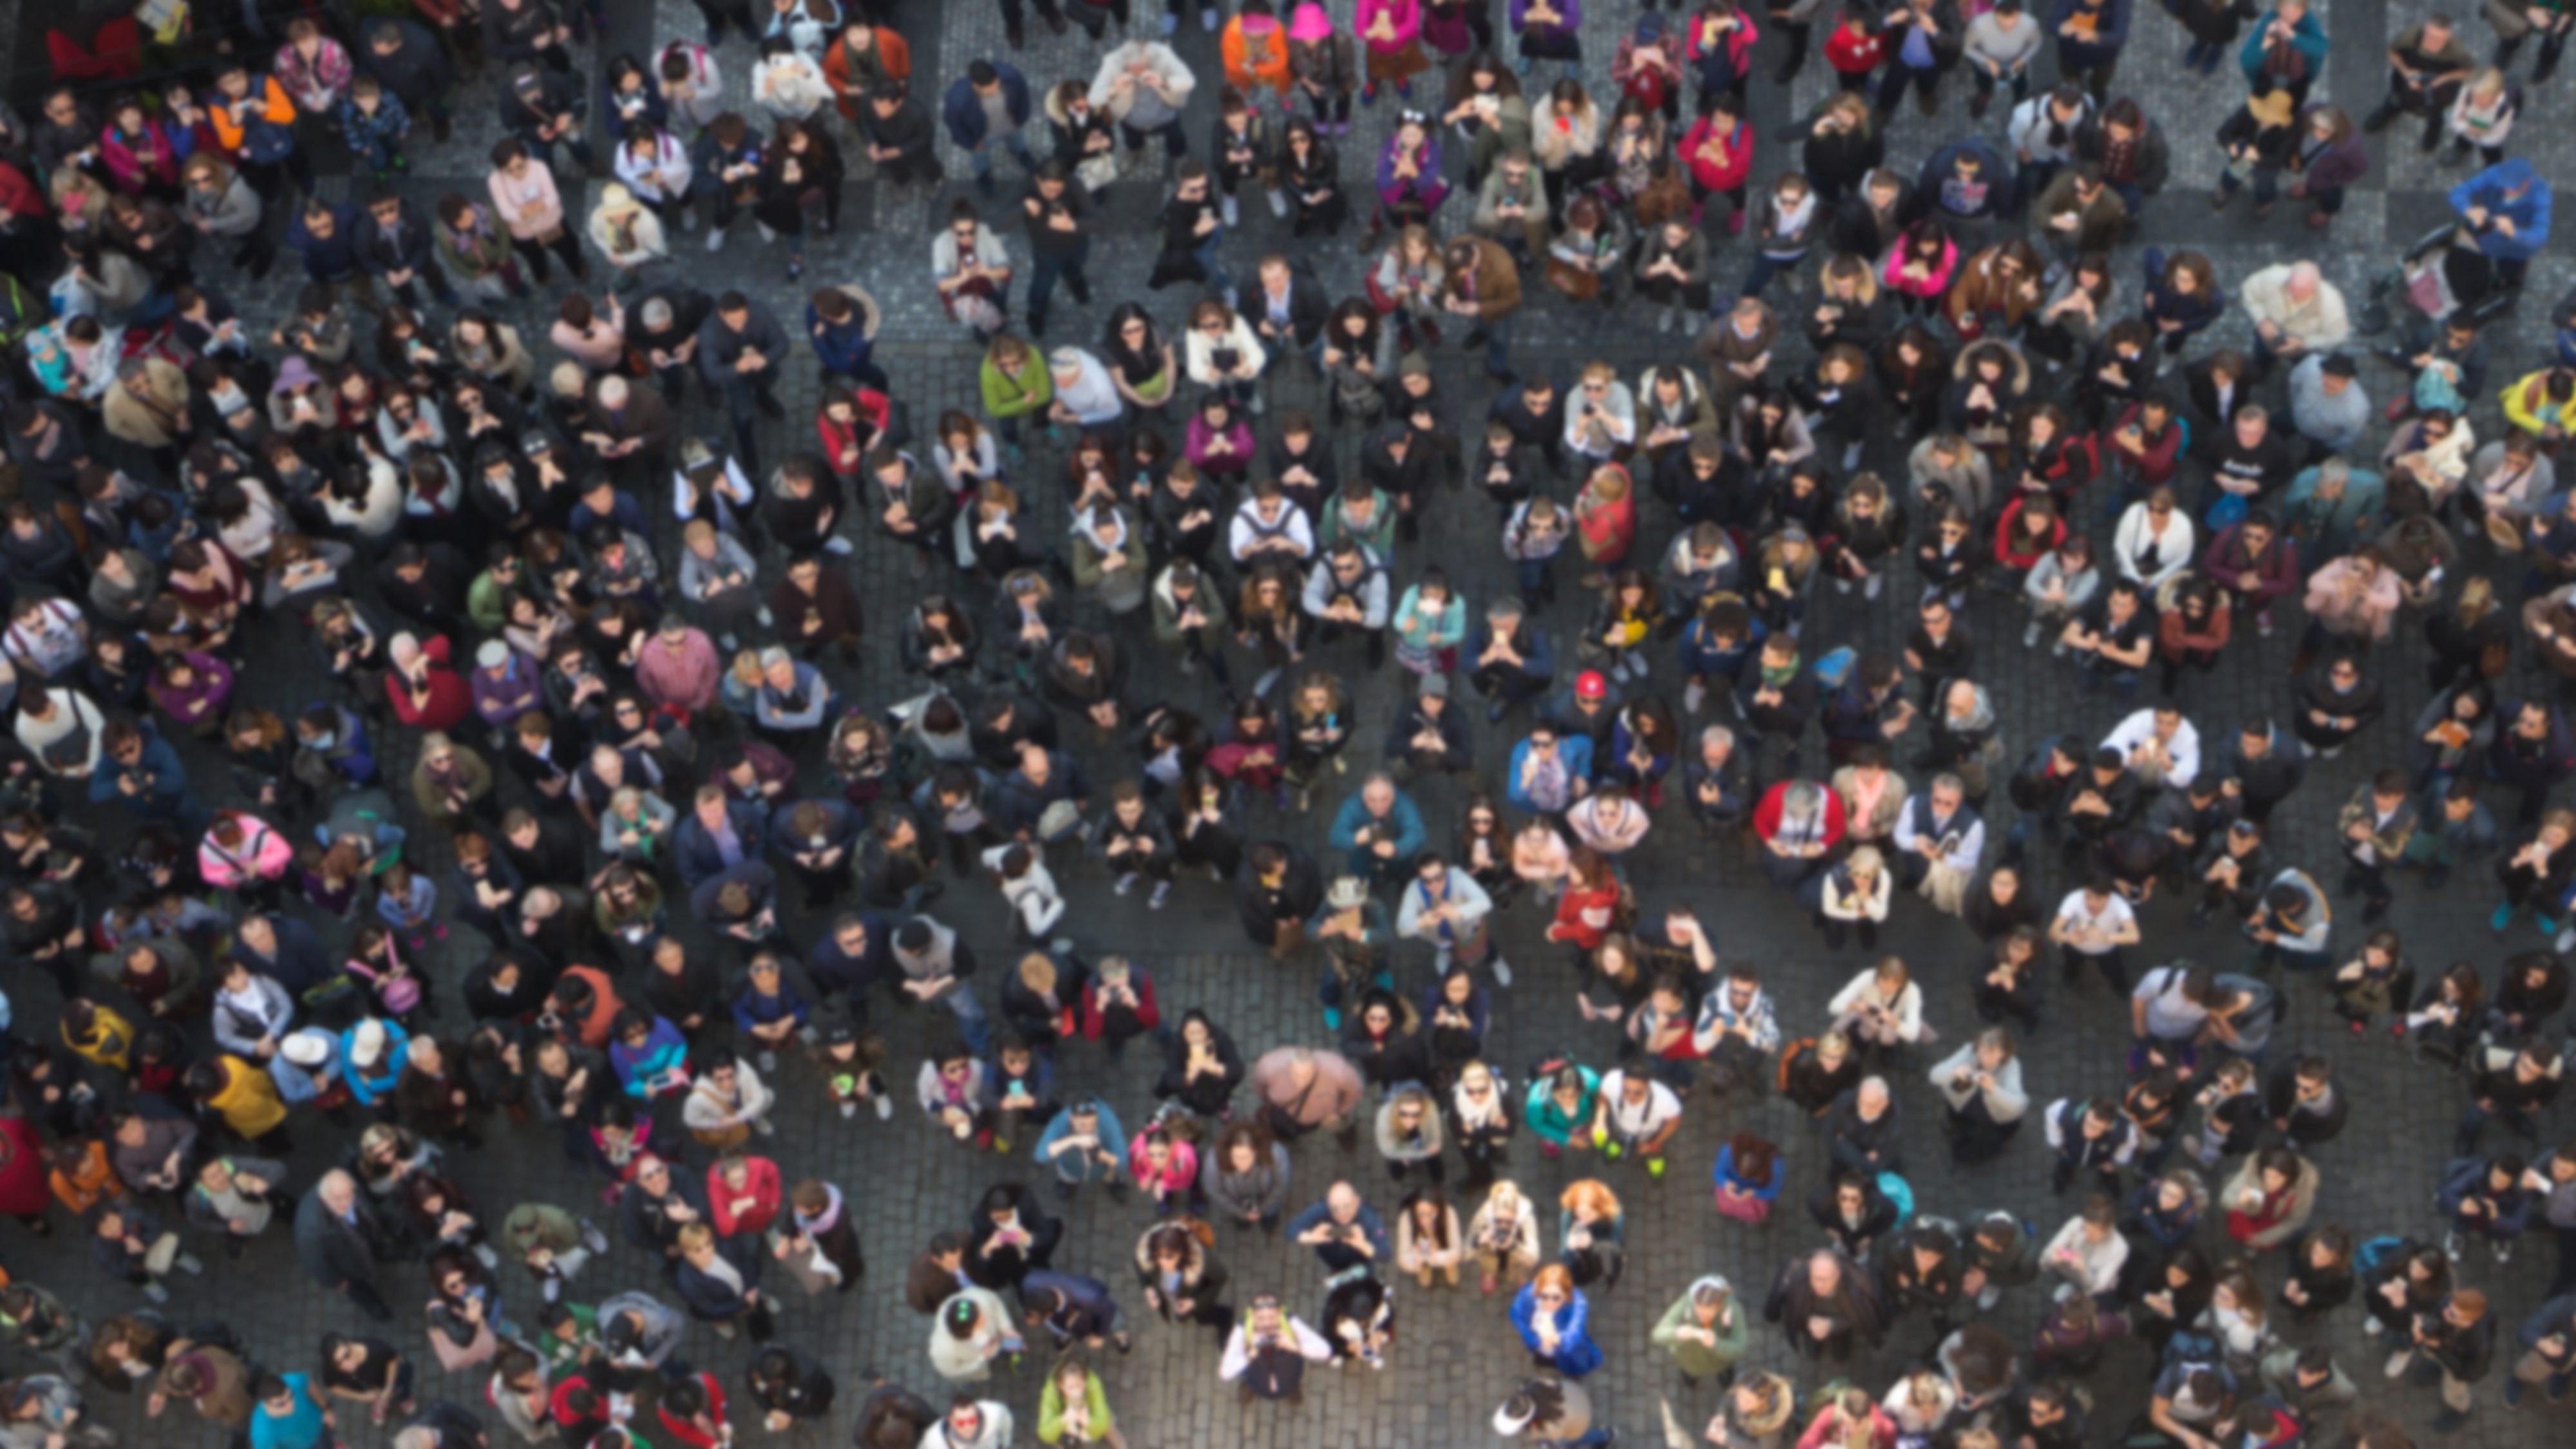 Aerial view of hundreds of people looking up at the camera